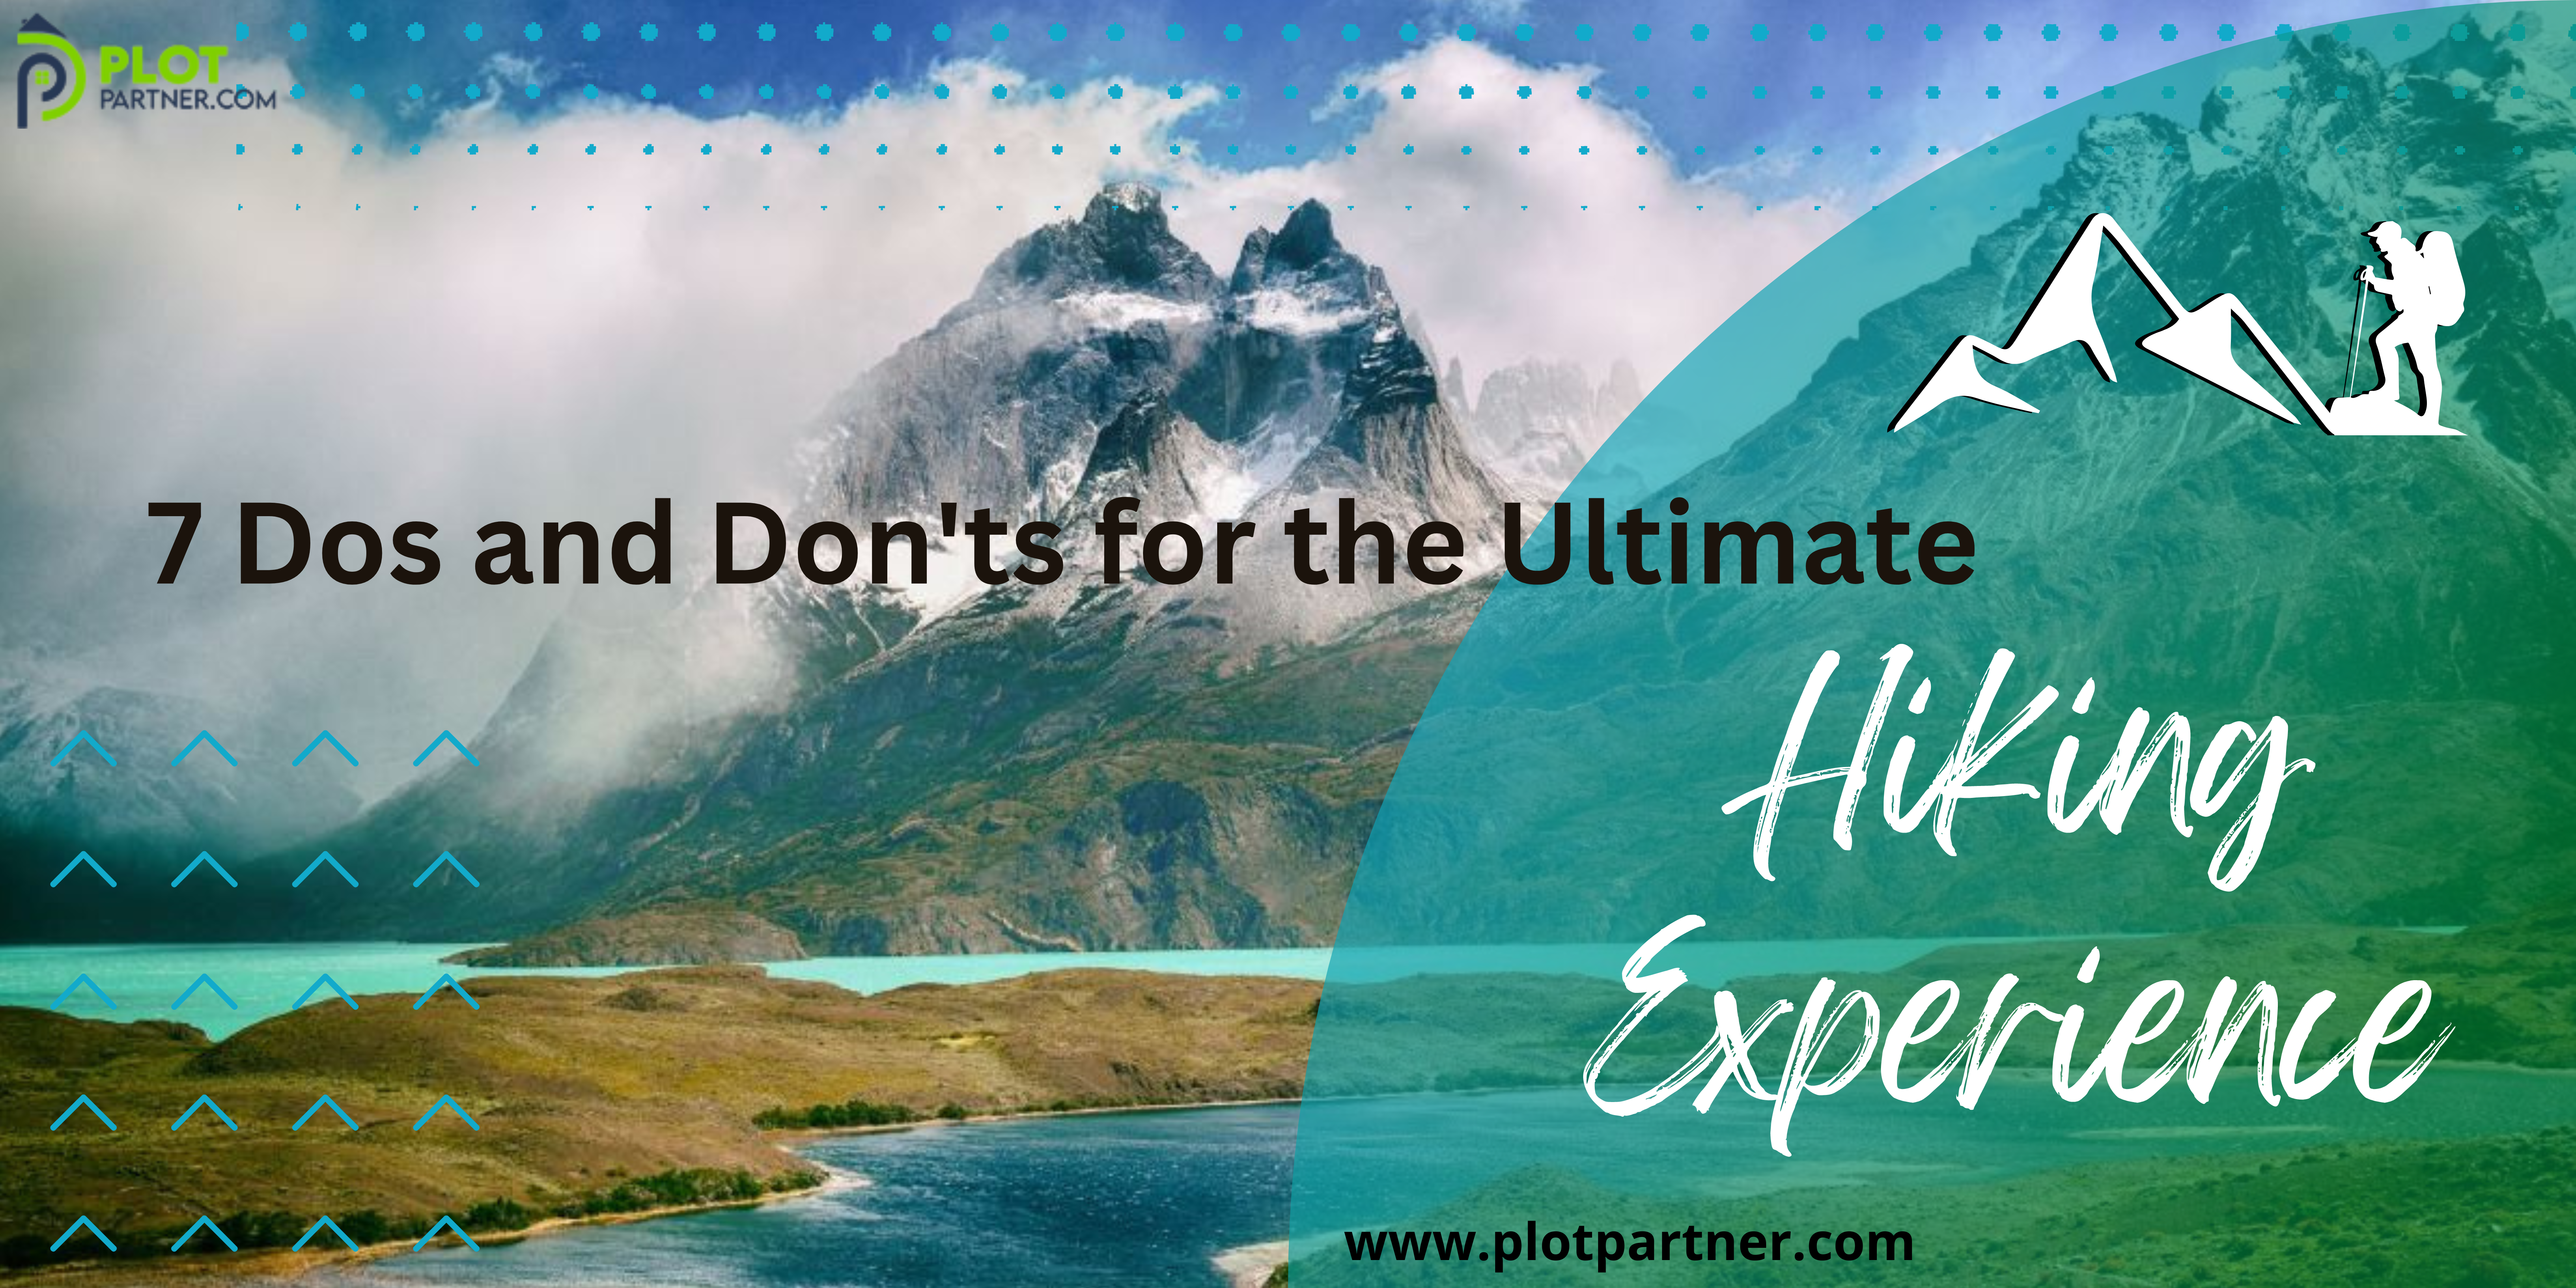 7 Dos and Don'ts for the Ultimate Hiking Experience